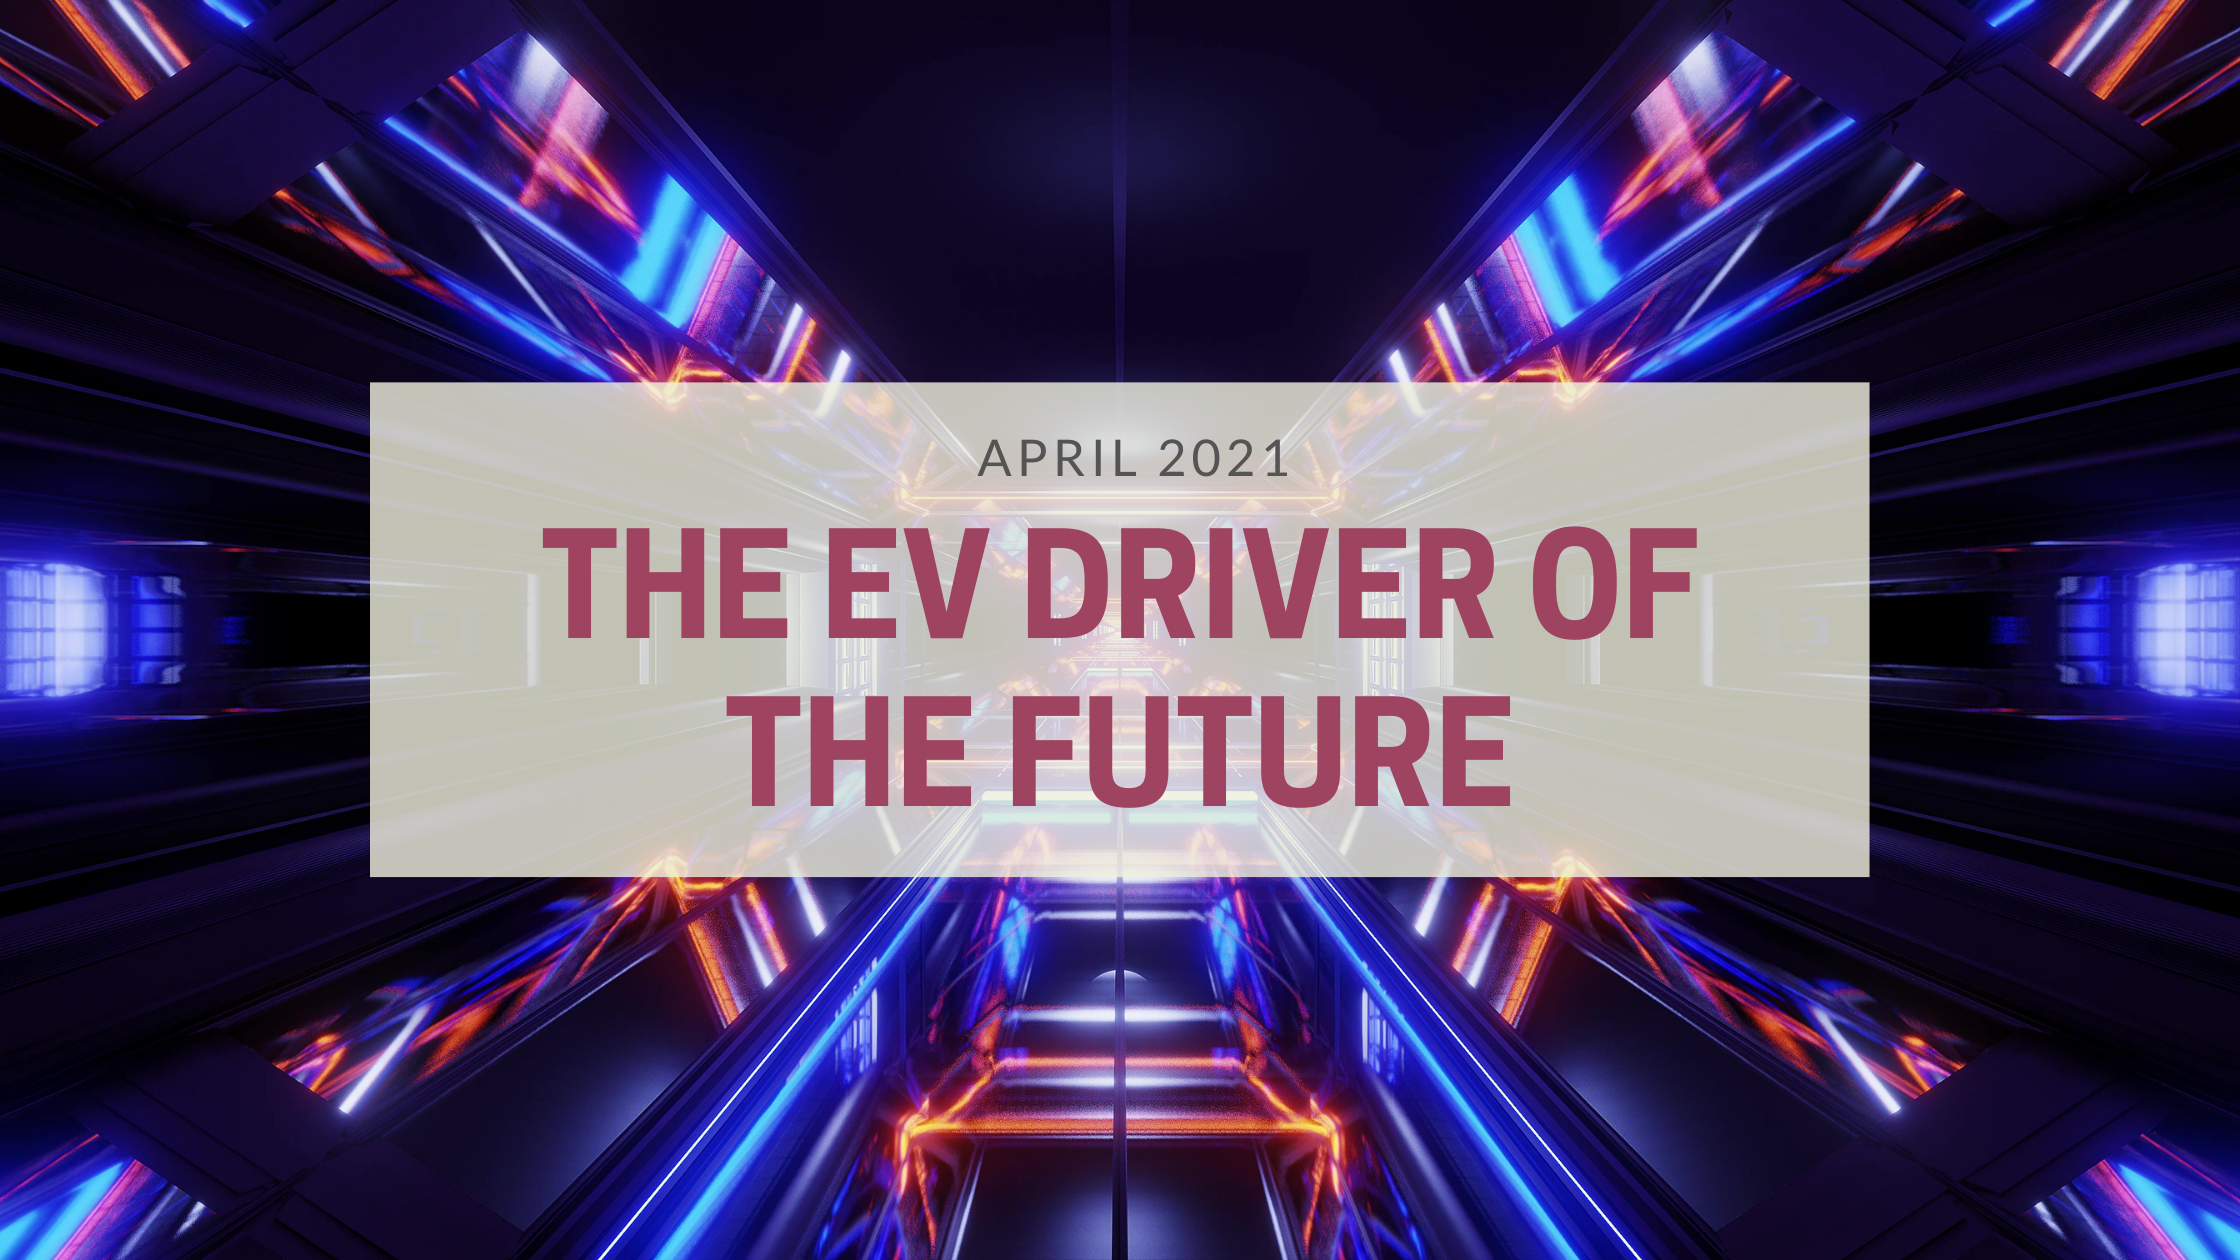 Read more about the article The EV Driver of the Future